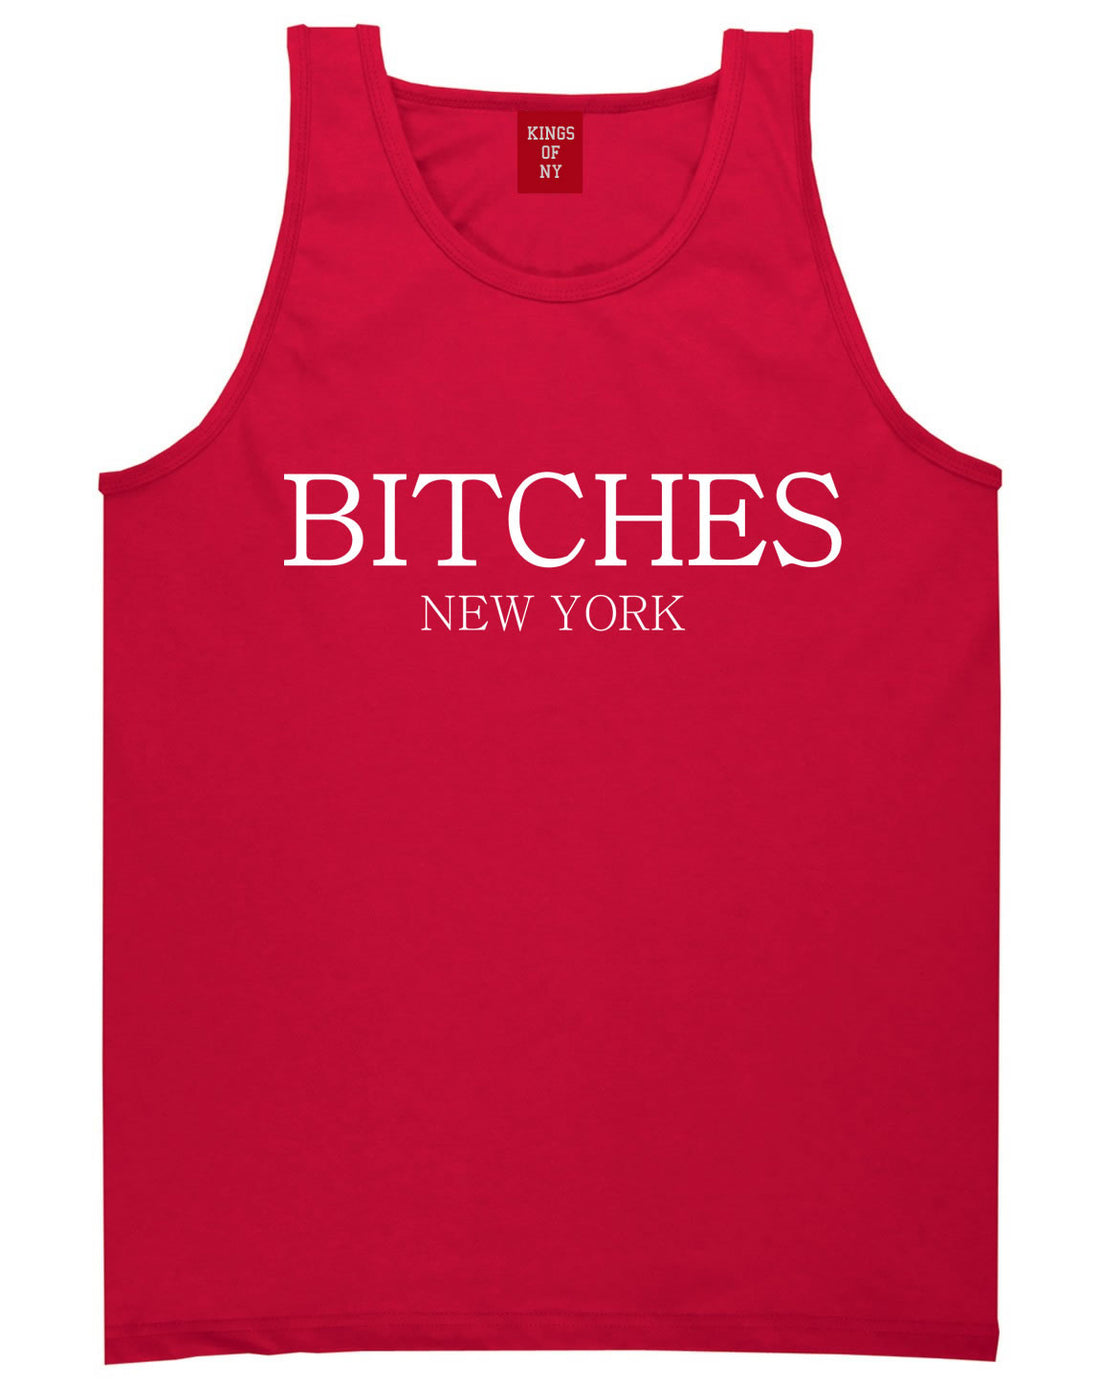  Bitches New York Tank Top in Red by Kings Of NY